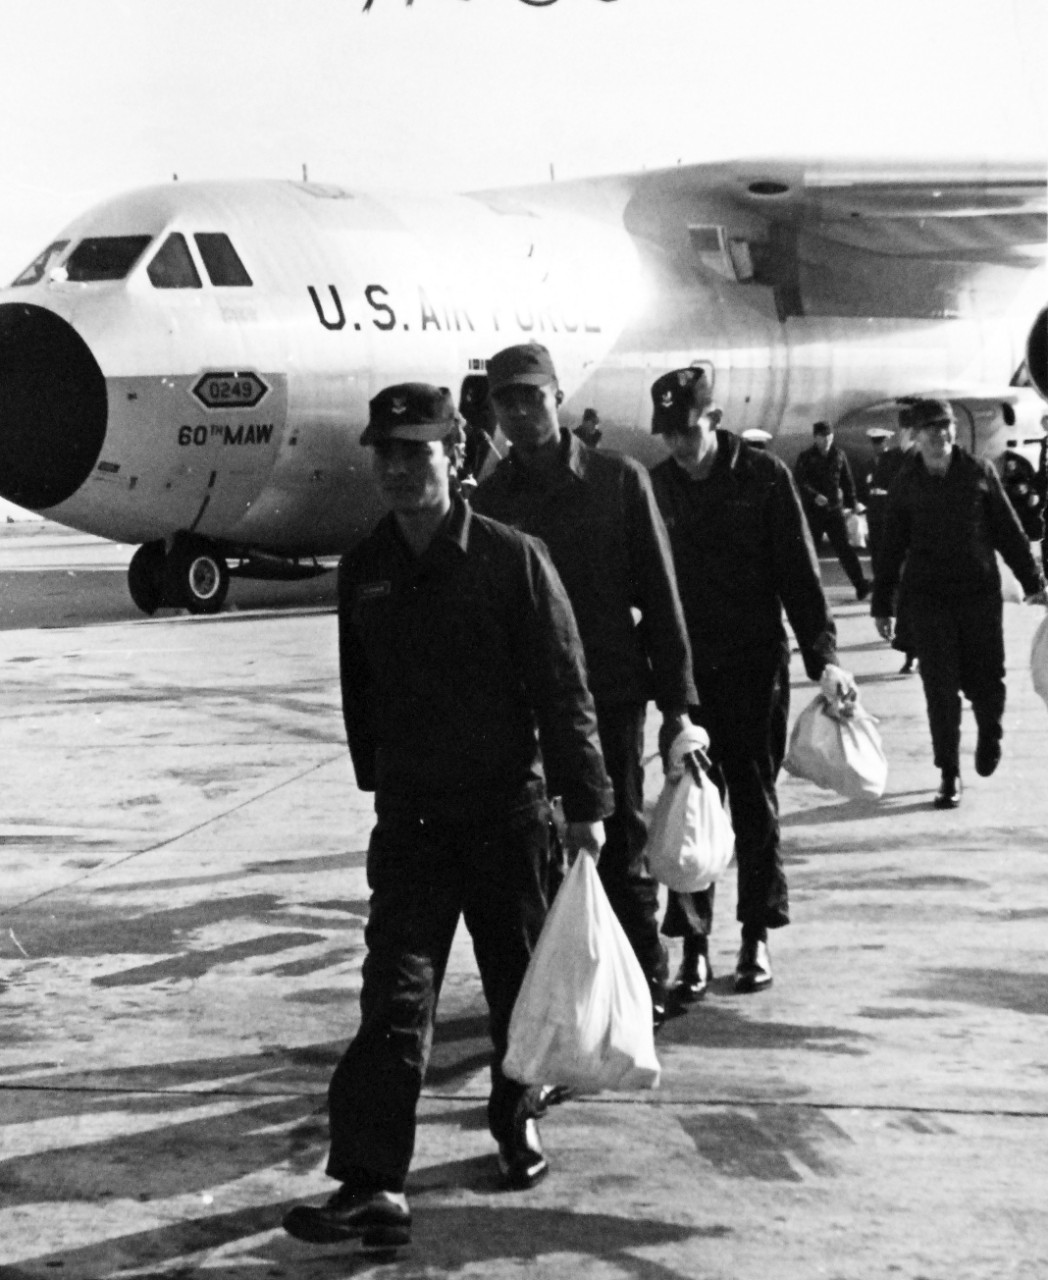 428-GX-USN-1140254:   San Diego, California, December 24, 1968.   Crewmen of USS Pueblo (AGER-2) debark from U.S. Air Force VC-137C “Stratoliner” cargo transport after a flight from the Republic of Korea to the U.S. Naval Air Station, Miramar.   Photographed by PH1 Robert A. Woods.     Official U.S. Navy Photograph, now in the collections of the National Archives.  (2017/05/23).  Photographed from reference card.   